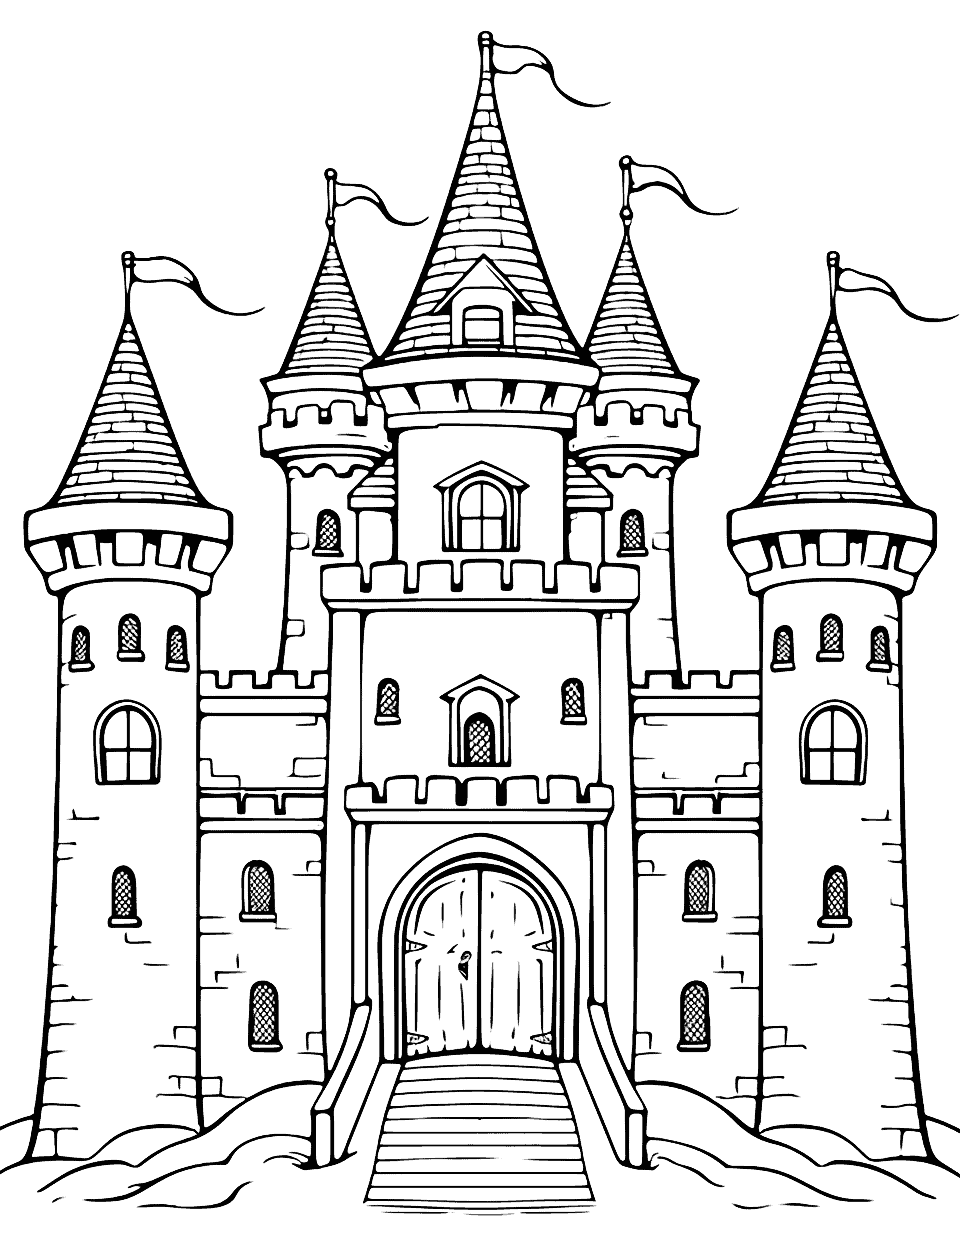 Fairy Tale Castle Cute Coloring Page - A castle straight out of a fairy tale, with turrets and a drawbridge.